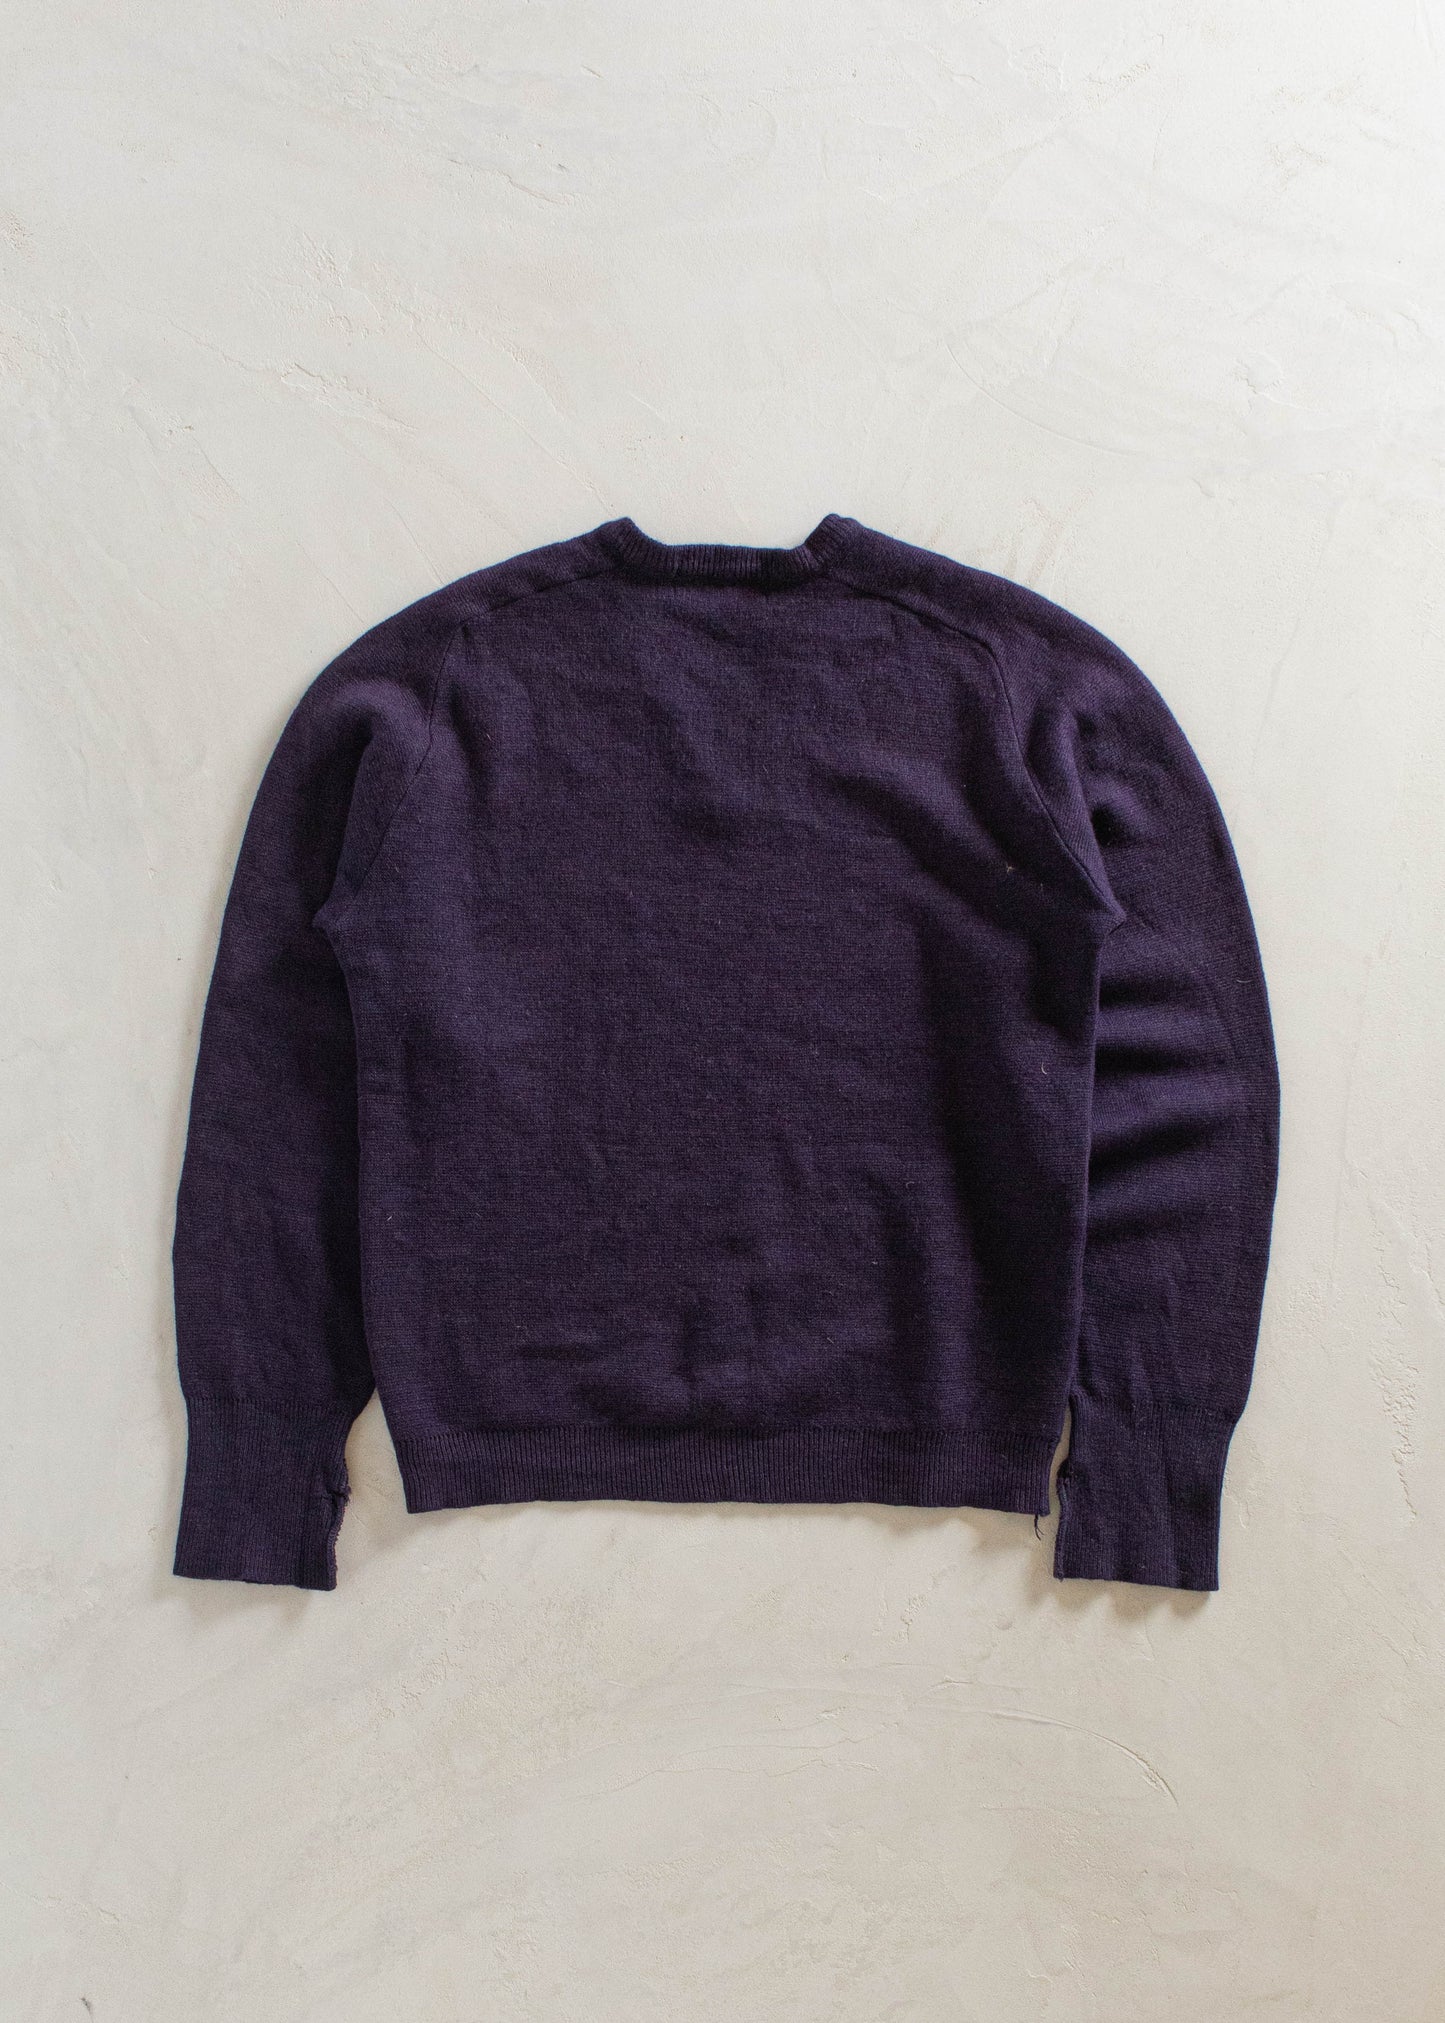 1970s Pullover Sweater Size S/M